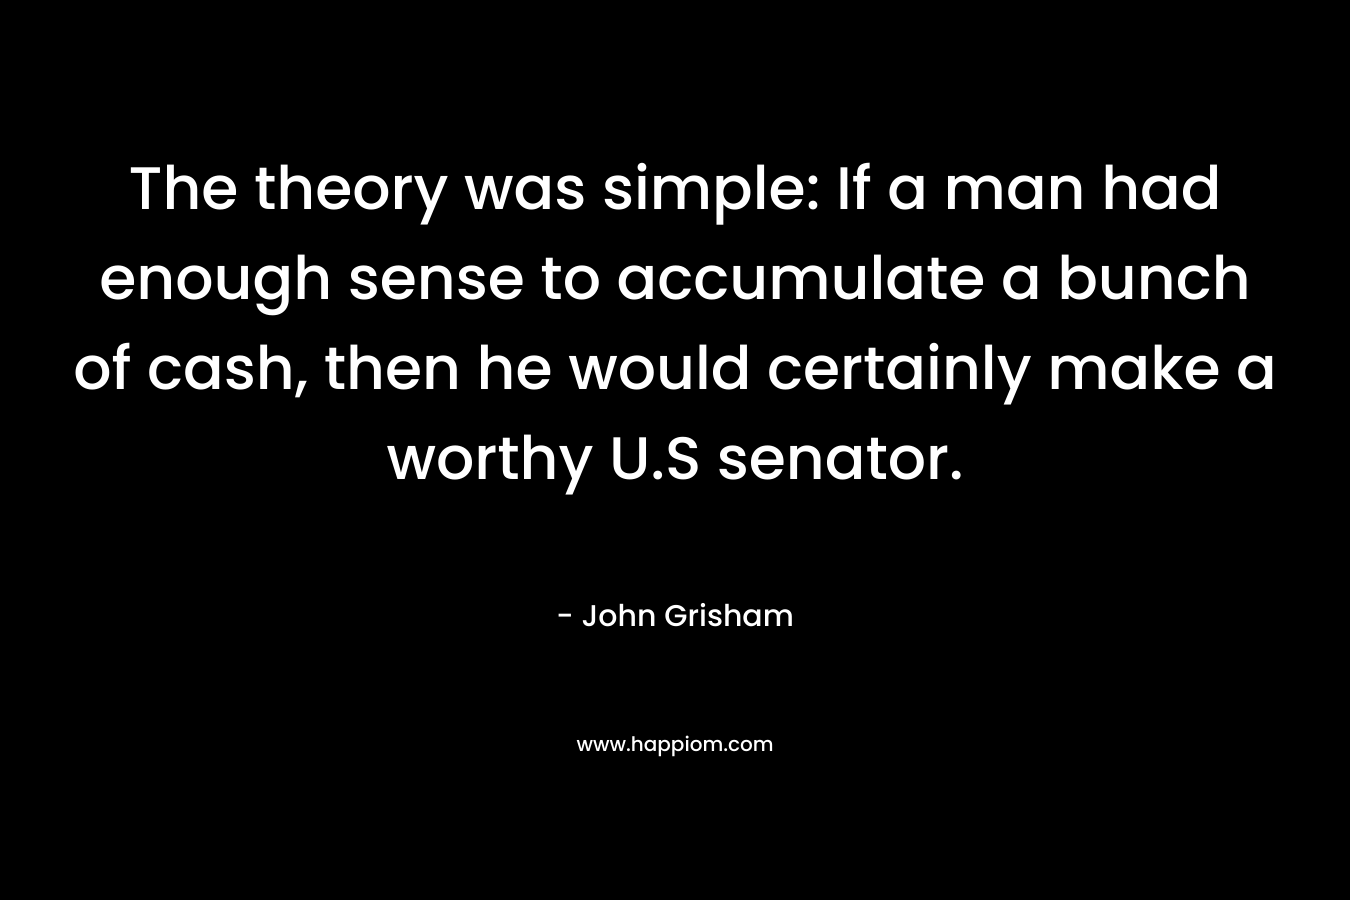 The theory was simple: If a man had enough sense to accumulate a bunch of cash, then he would certainly make a worthy U.S senator. – John Grisham